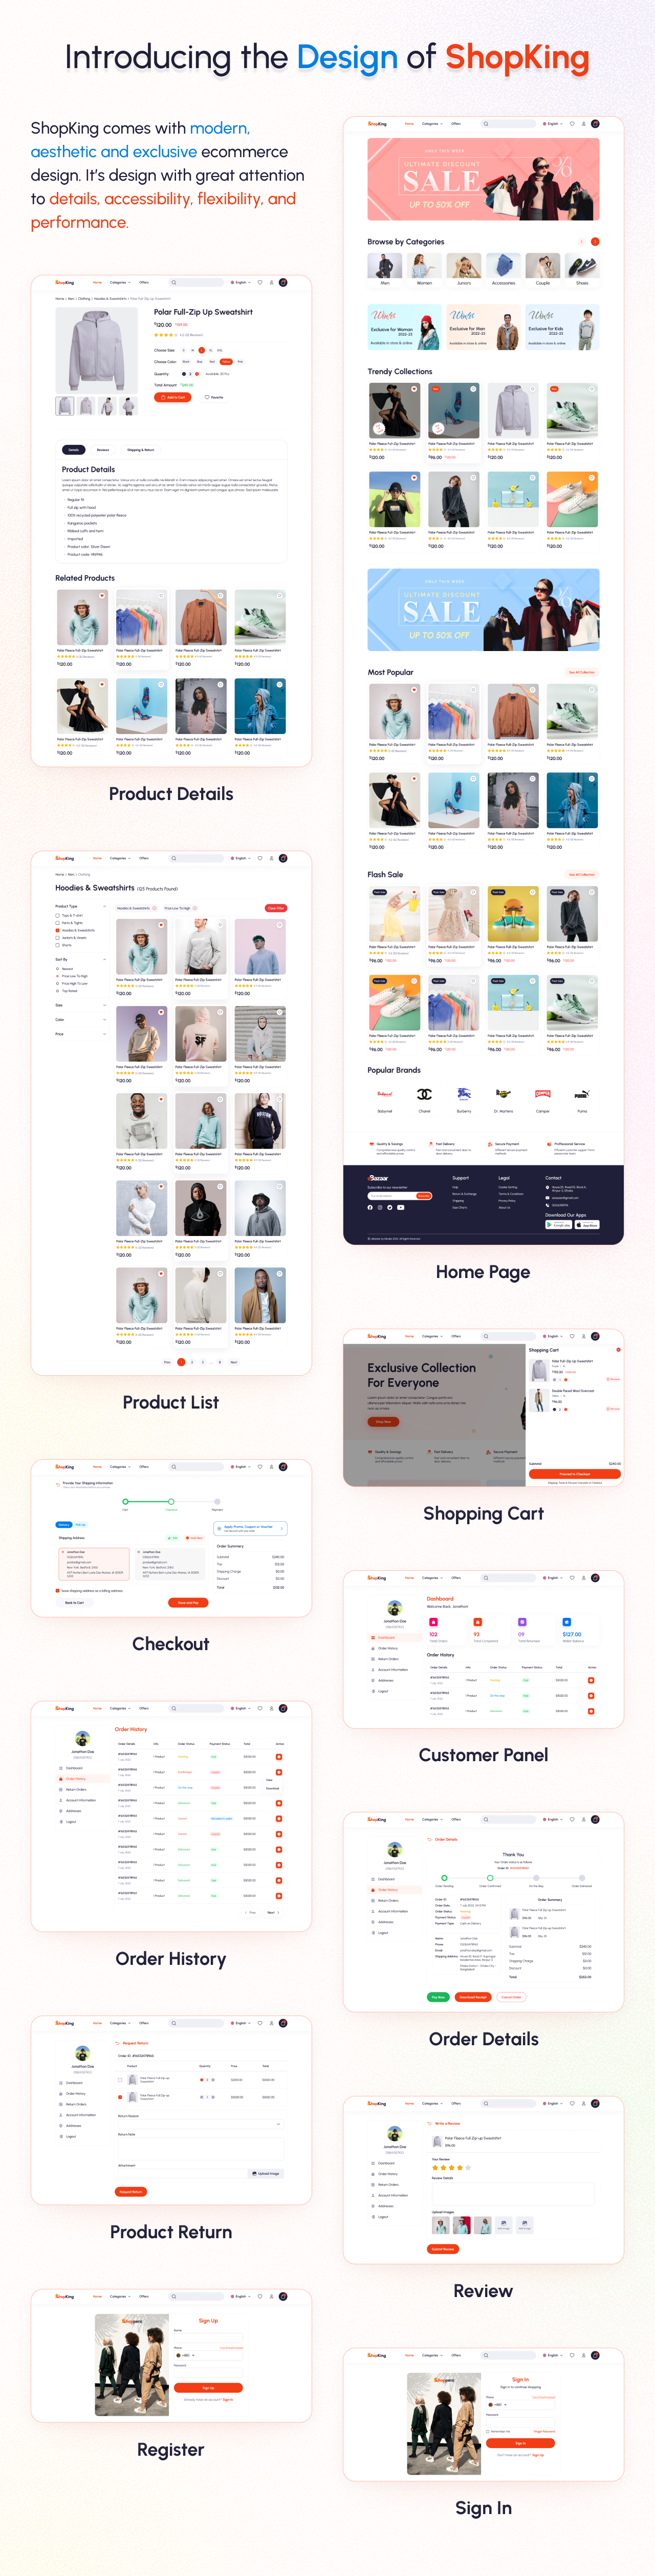 Responsive User Interface, item page, category, cart, order details, product variation